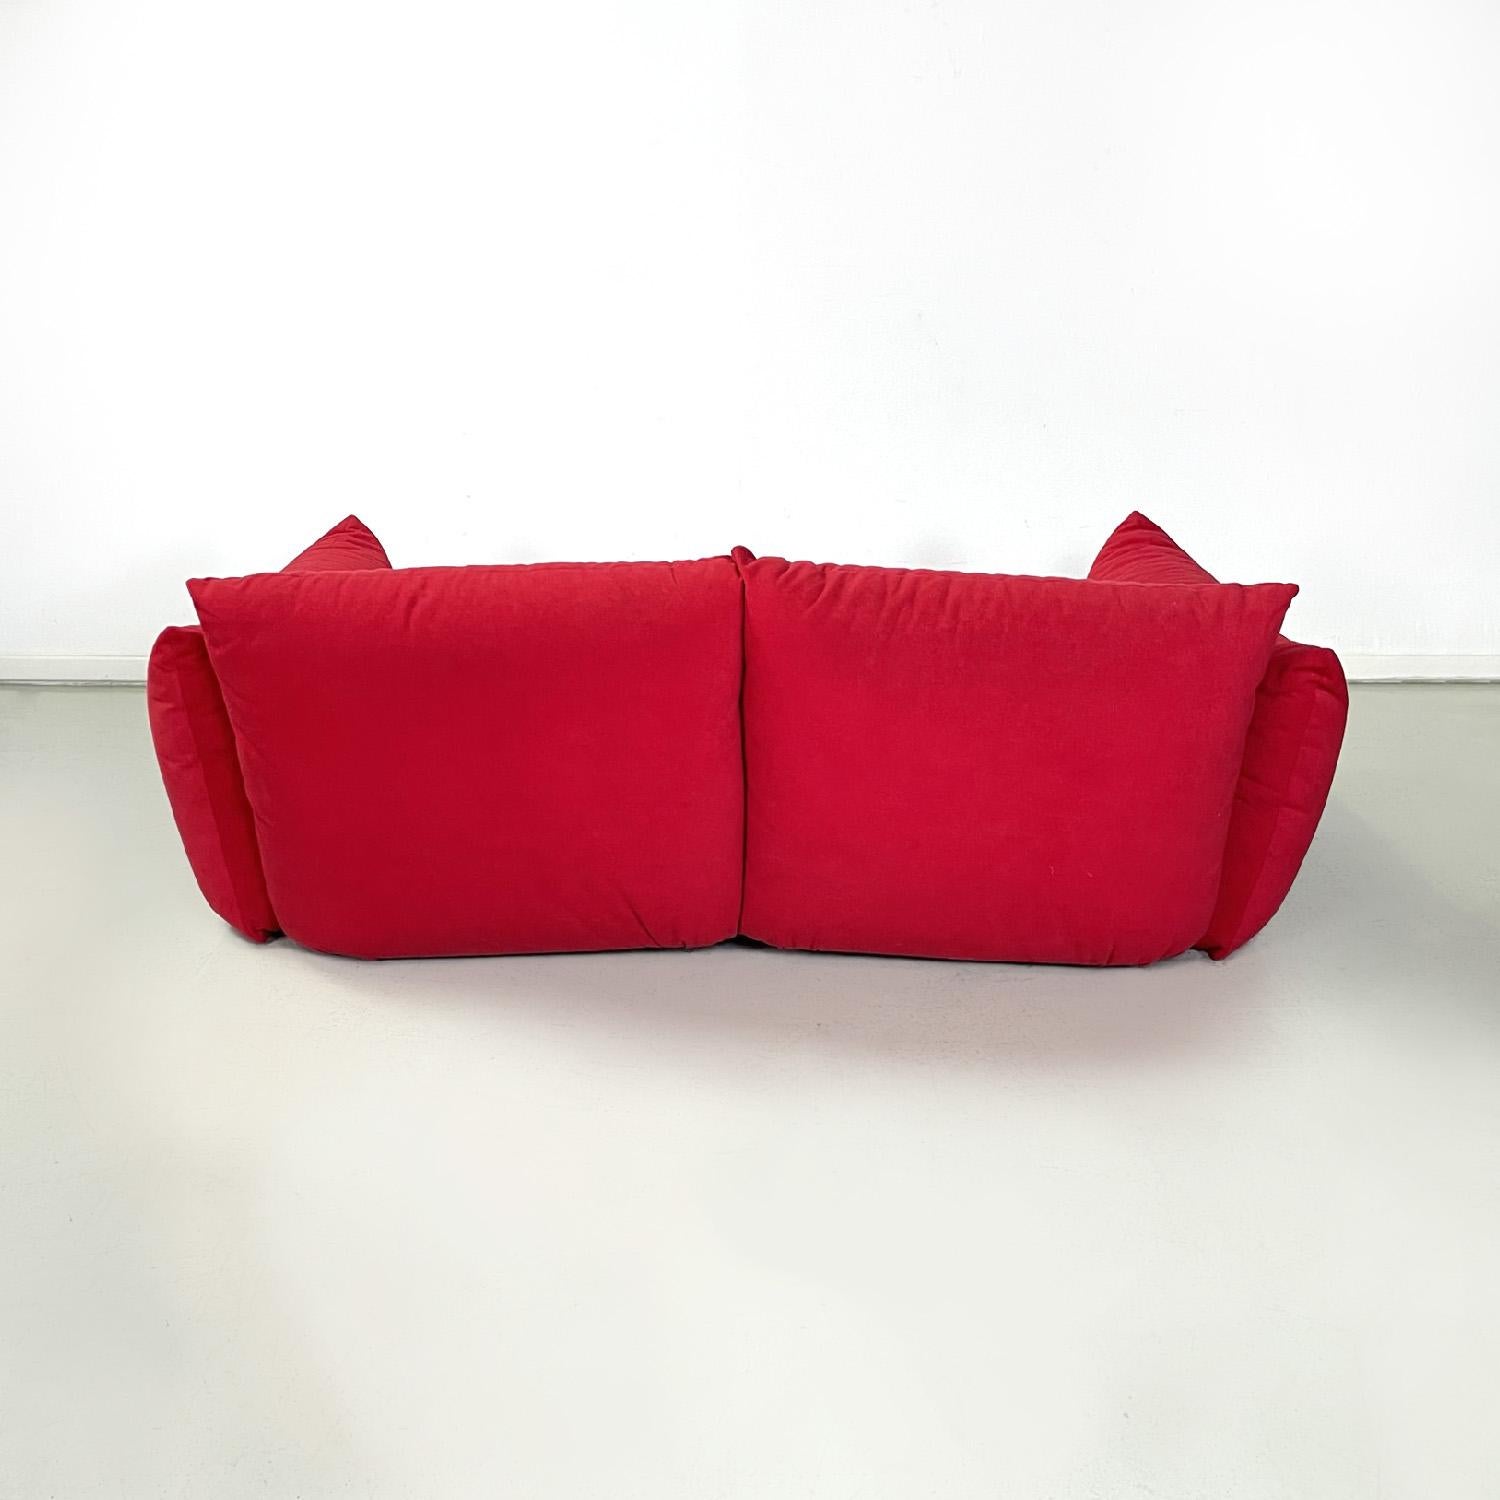 Modern Italian modern red sofas Marenco by Mario Marenco for Arflex, 1970s For Sale